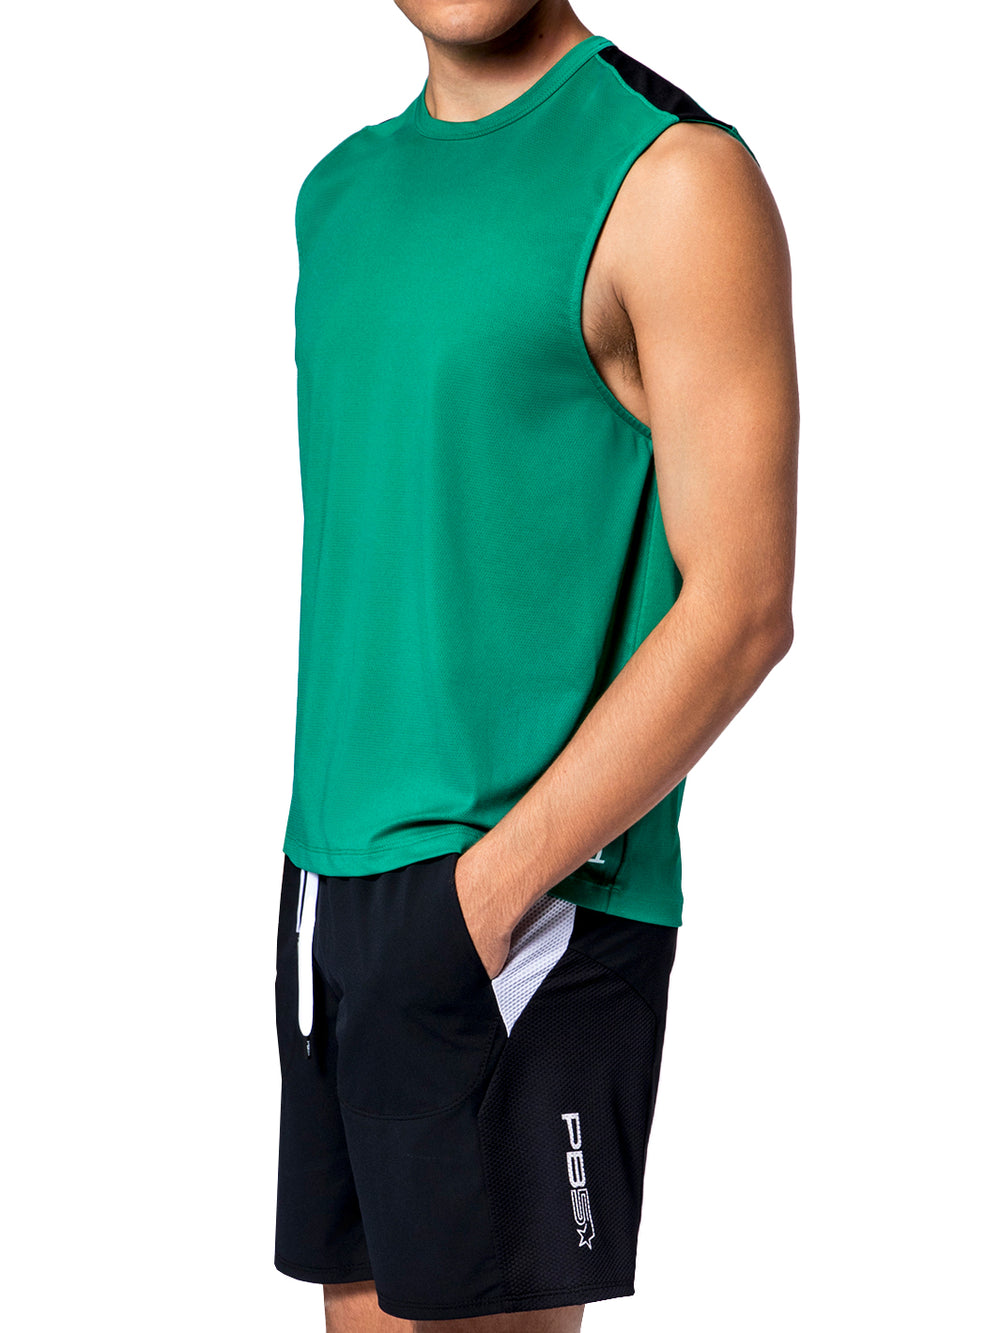 Model in men's jade Vented Sleeveless Tee and PB5star black Vented Court Shorts with hand in pocket, showcasing the sporty design.